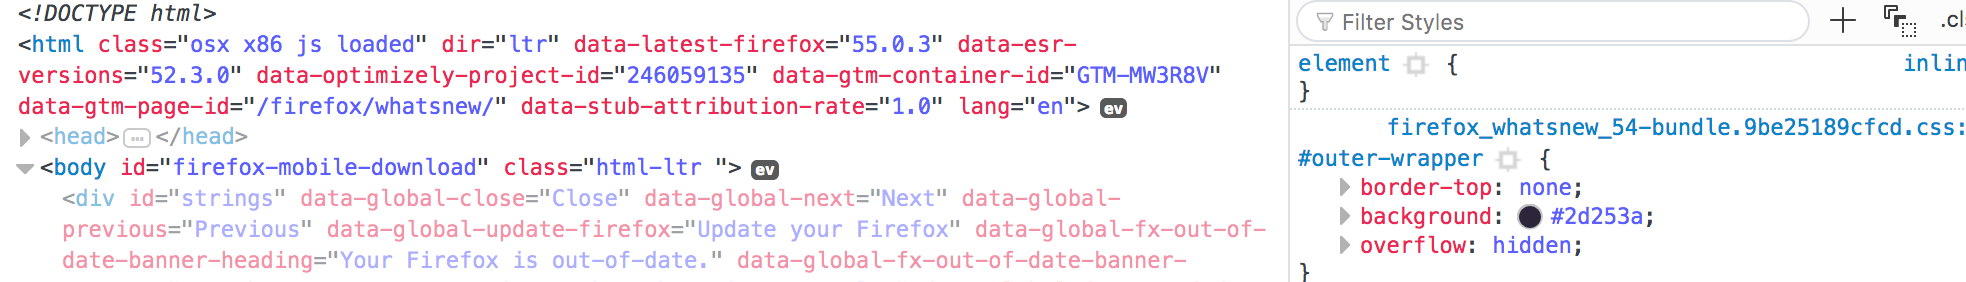 Firefox's current syntax highlighting